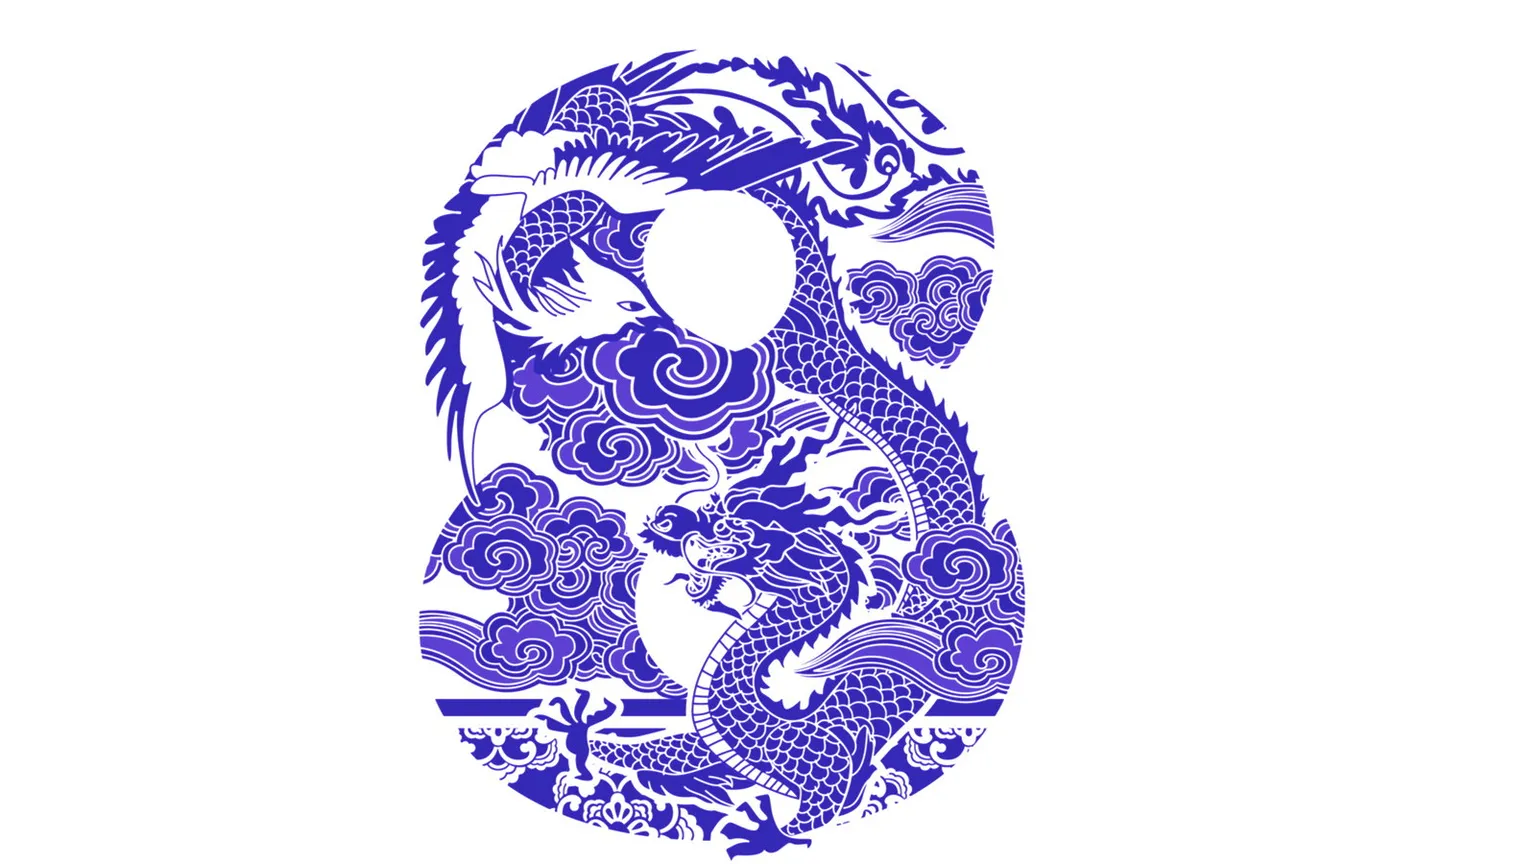 China's Lucky 8. Image: Shutterstock